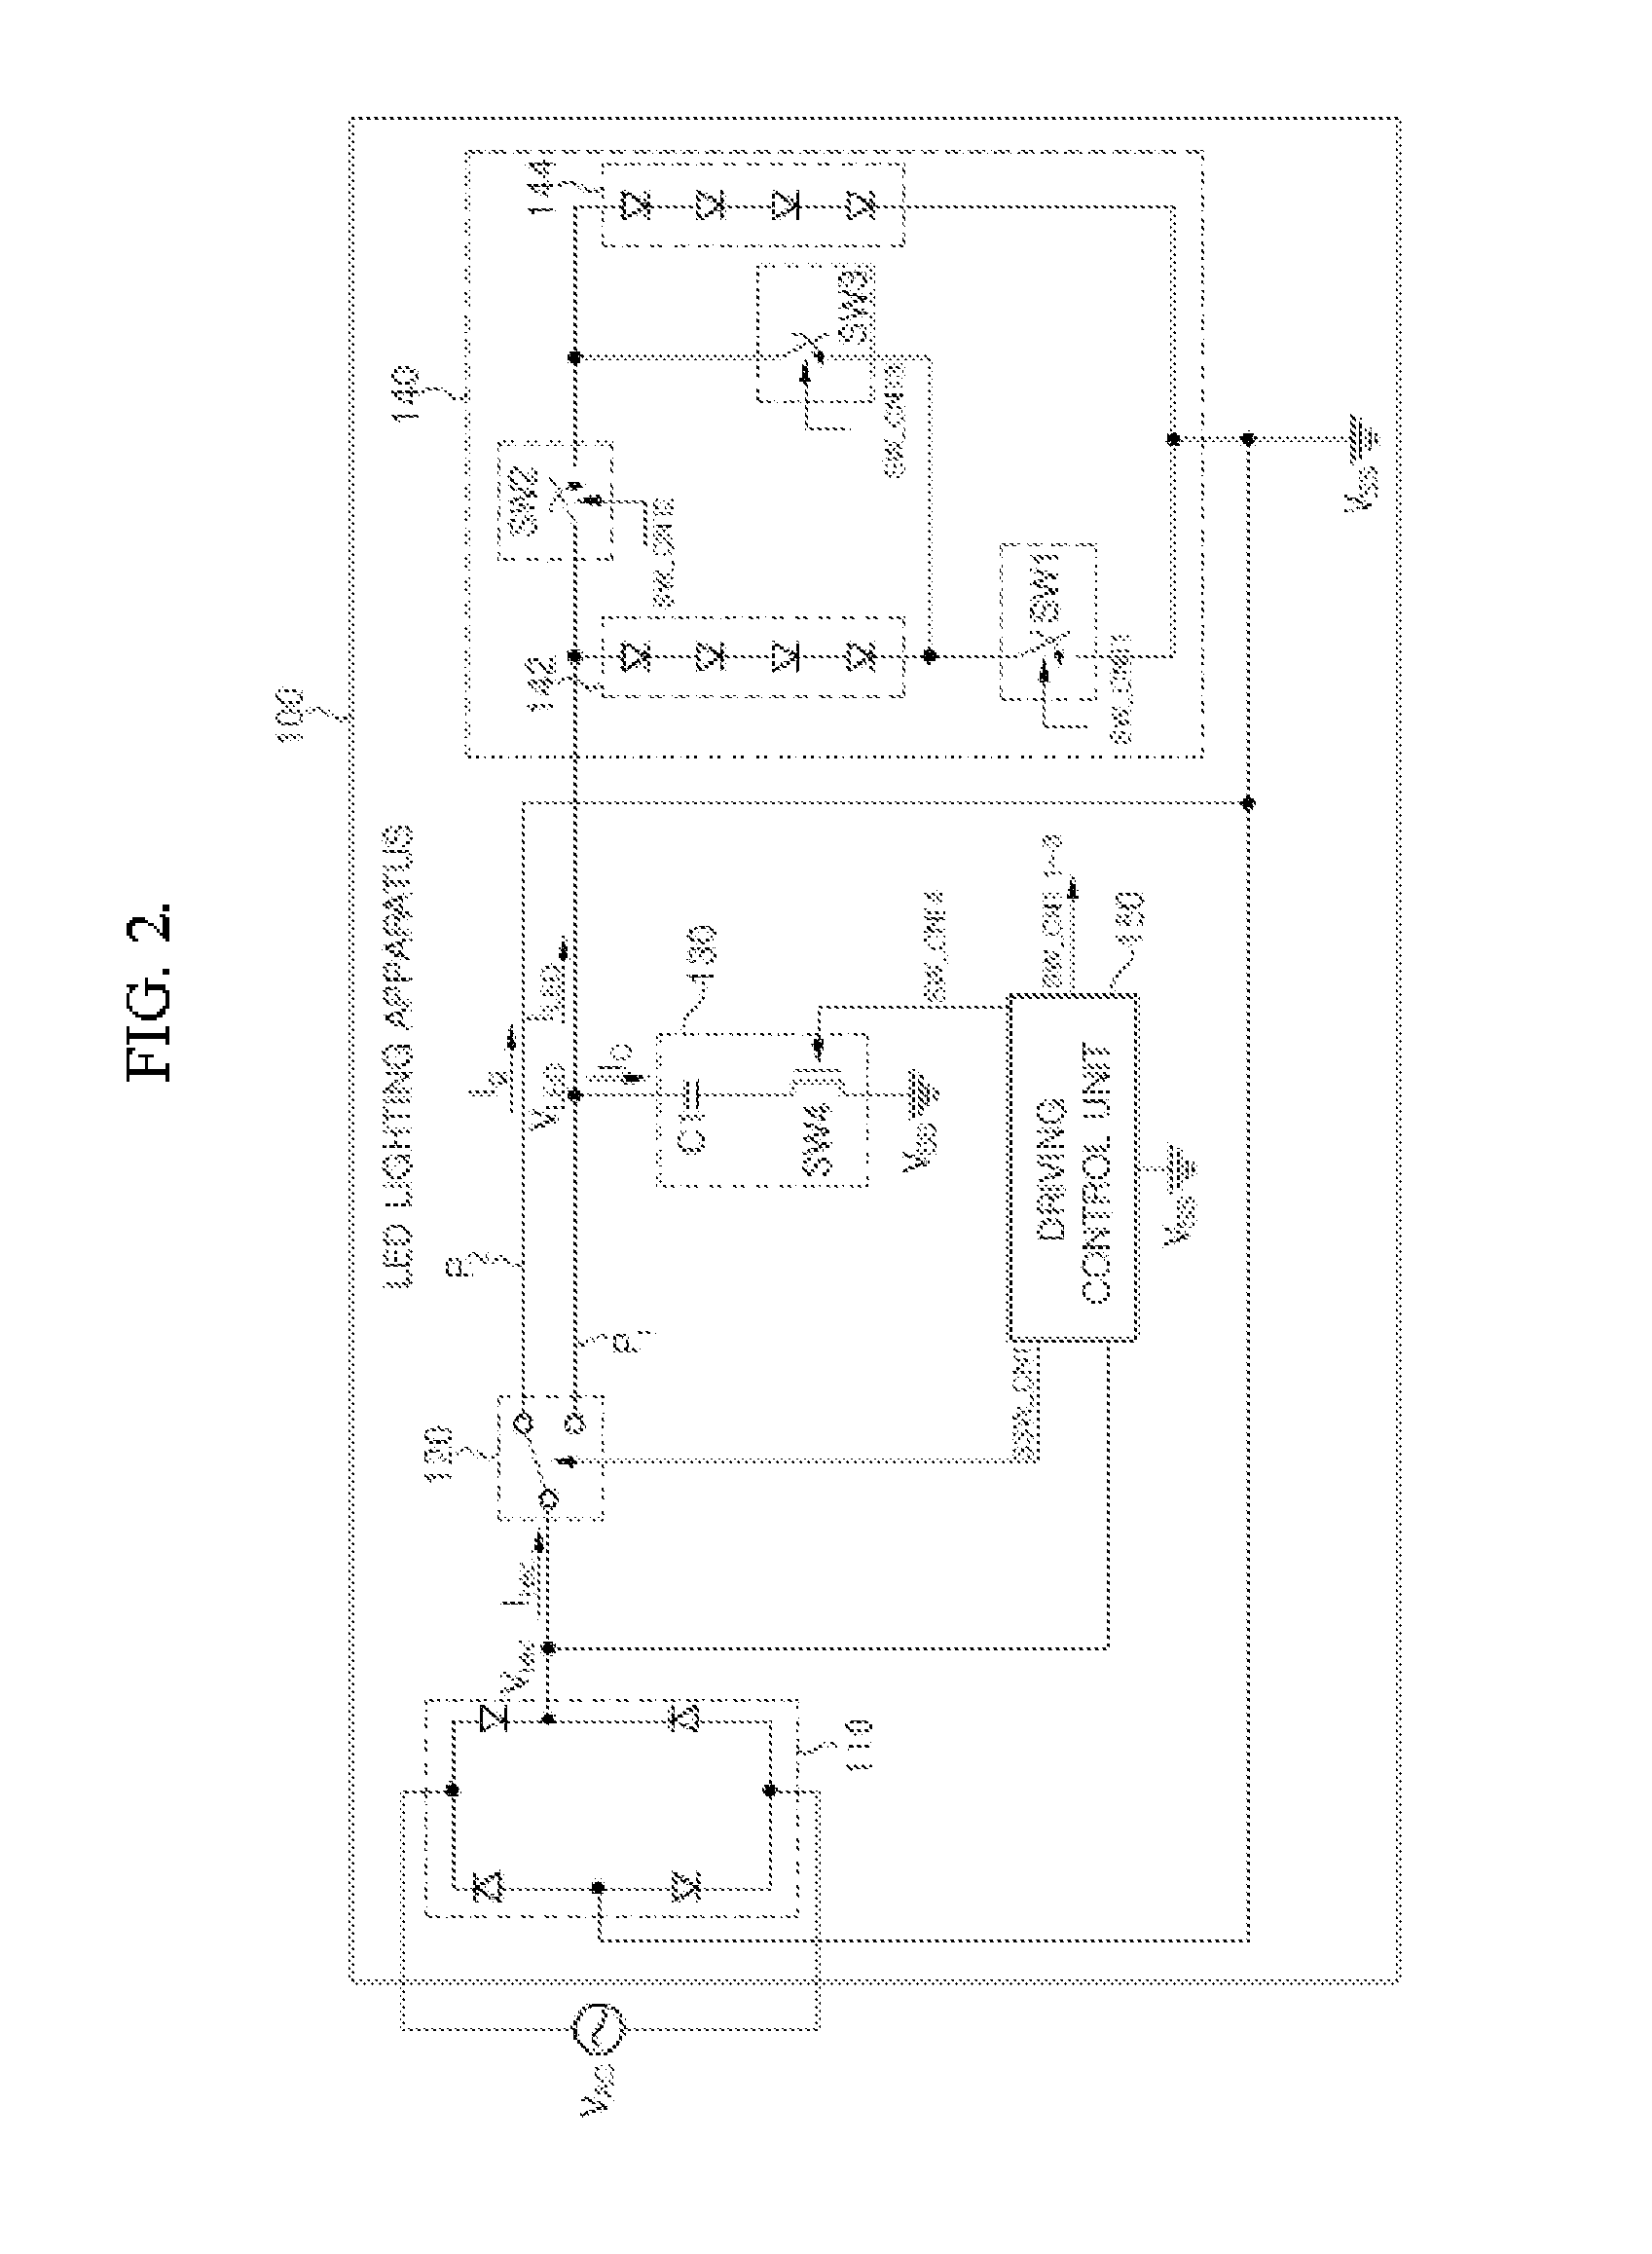 LED lighting apparatus with improved total harmonic distortion in source current